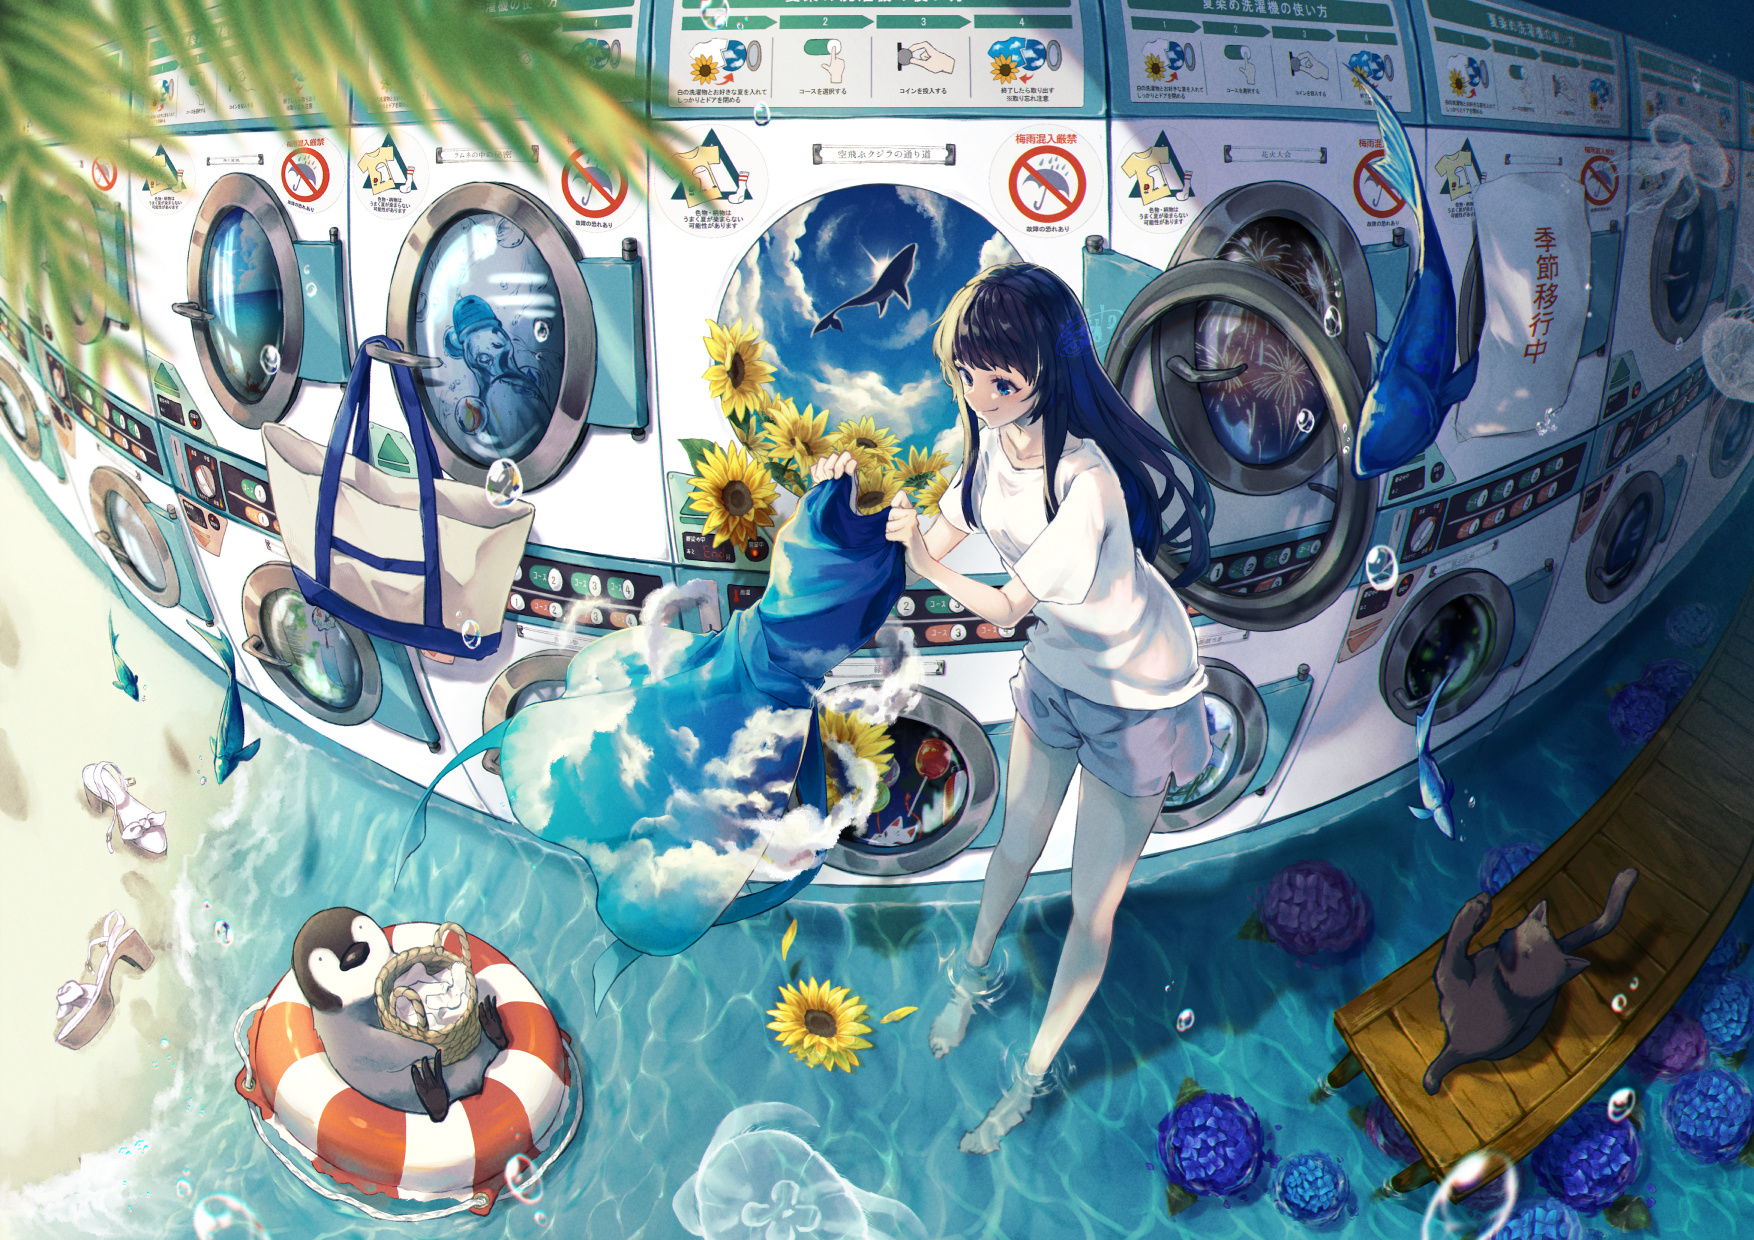 Anime 1754x1240 anime girls blue dress sunflowers laundromat washing machine flowers dark hair women outdoors long hair fisheye lens leaves petals sky clouds fish beach Japanese flying whales animals water drops bubbles Canned Rose penguins Rhododendron fireworks white sandals jetty water cats dress standing in water jellyfish blue eyes smiling high angle